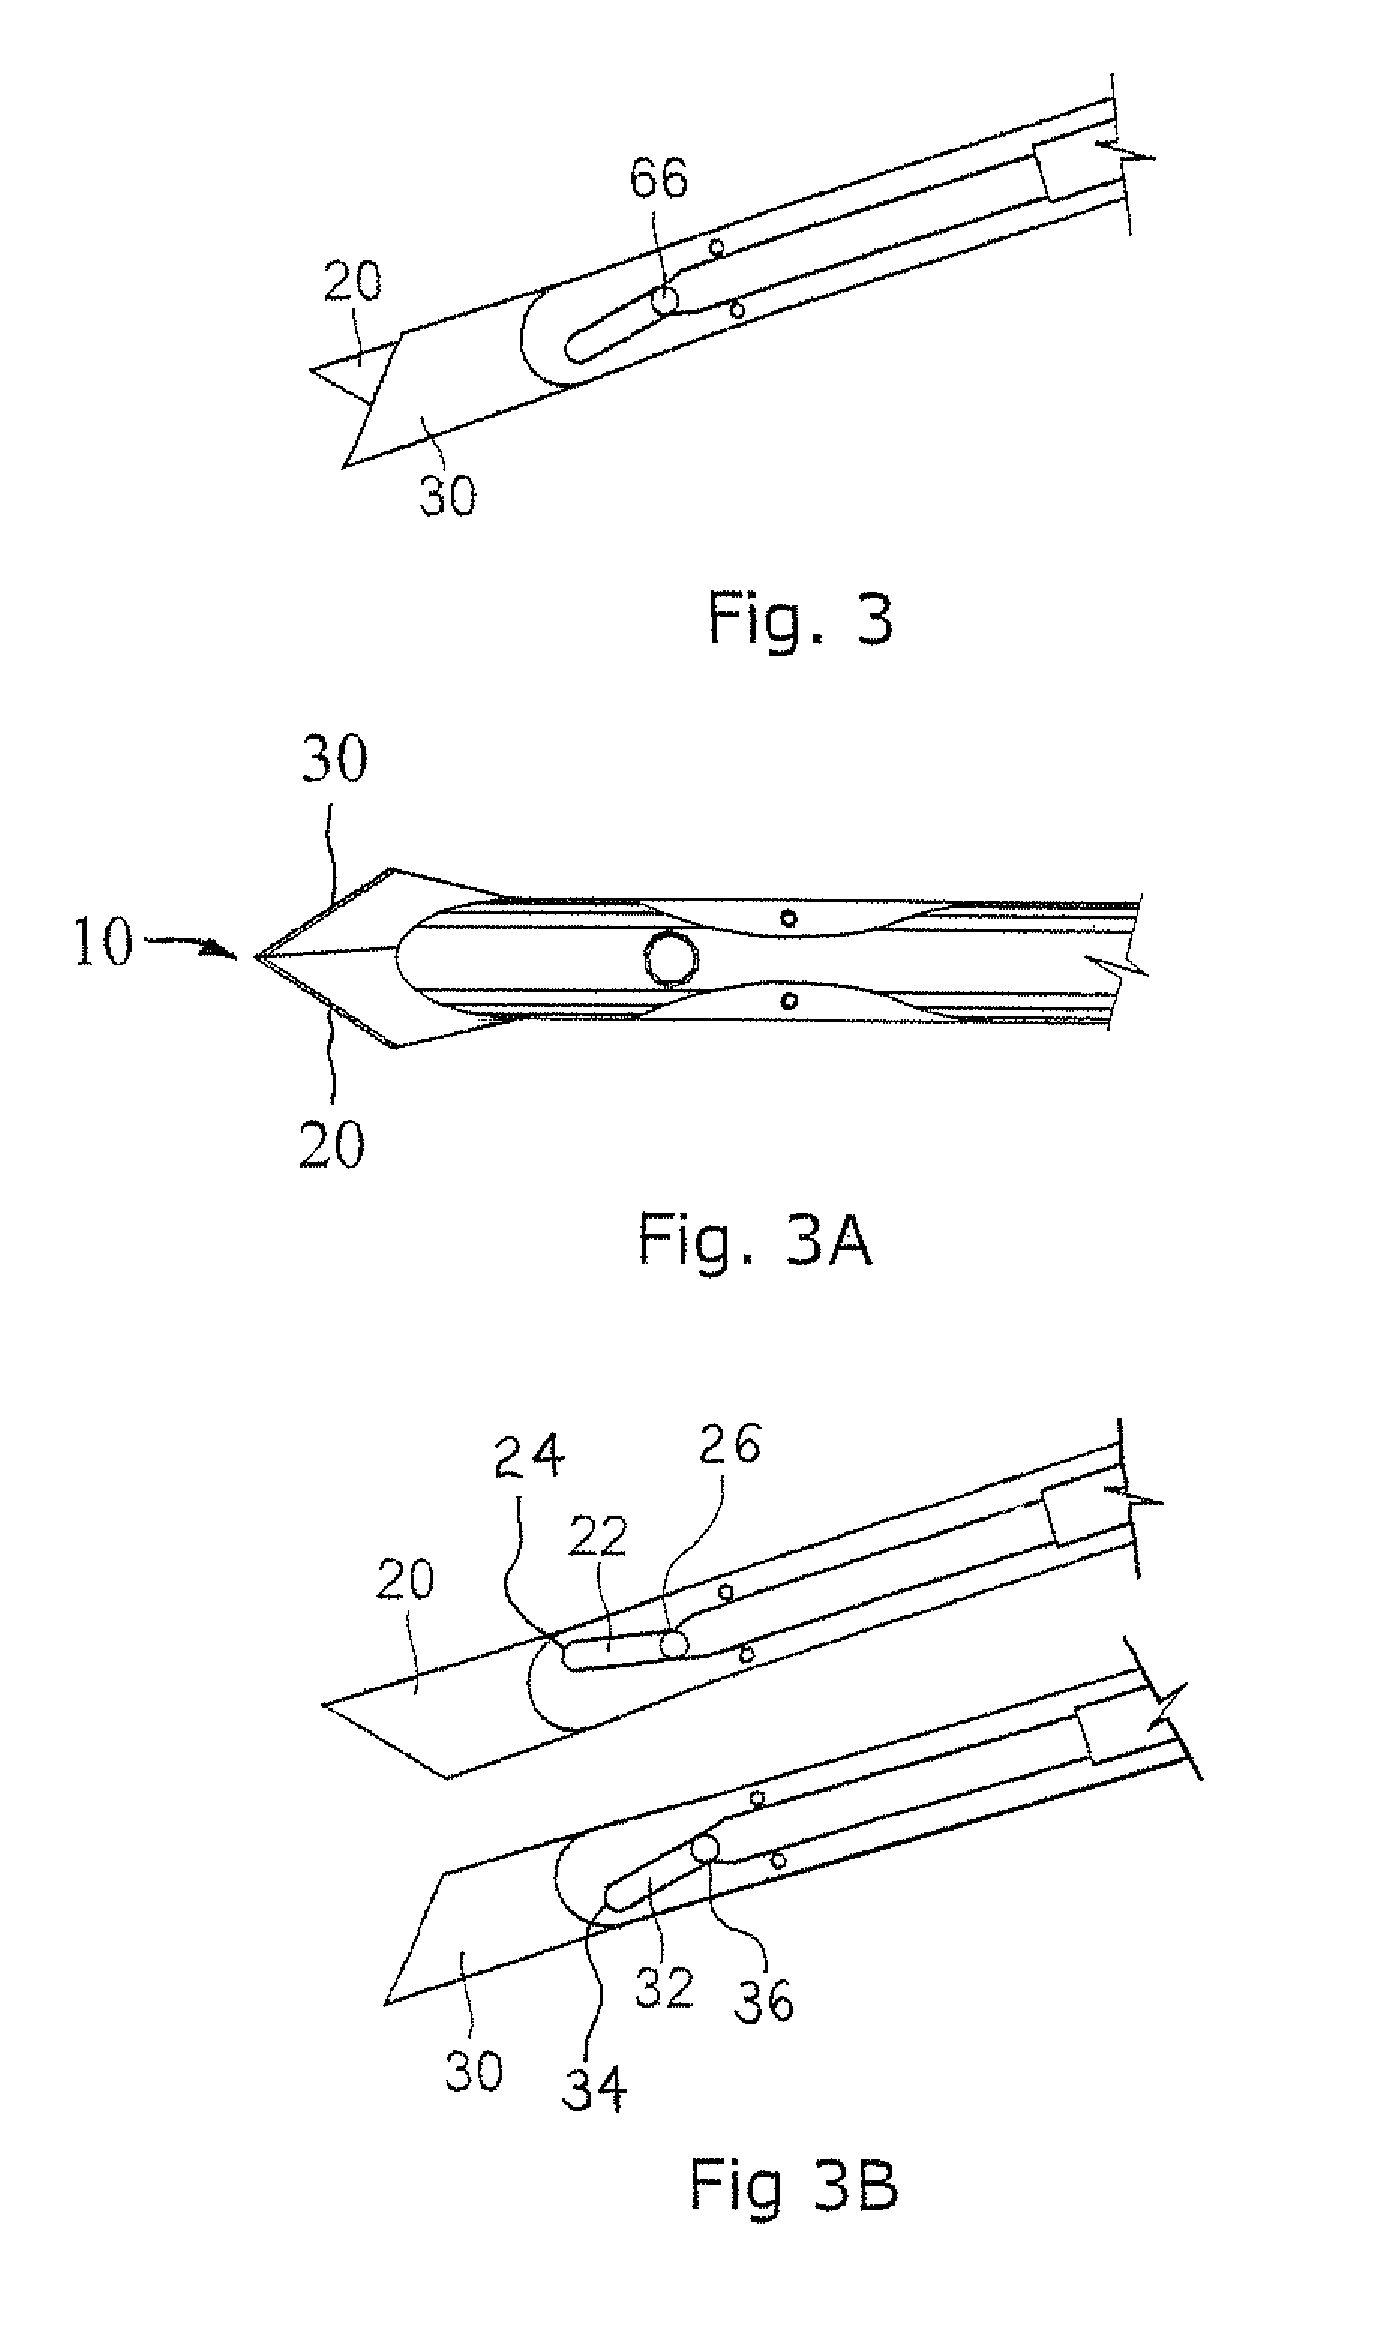 Multi-functional double bladed surgical tool